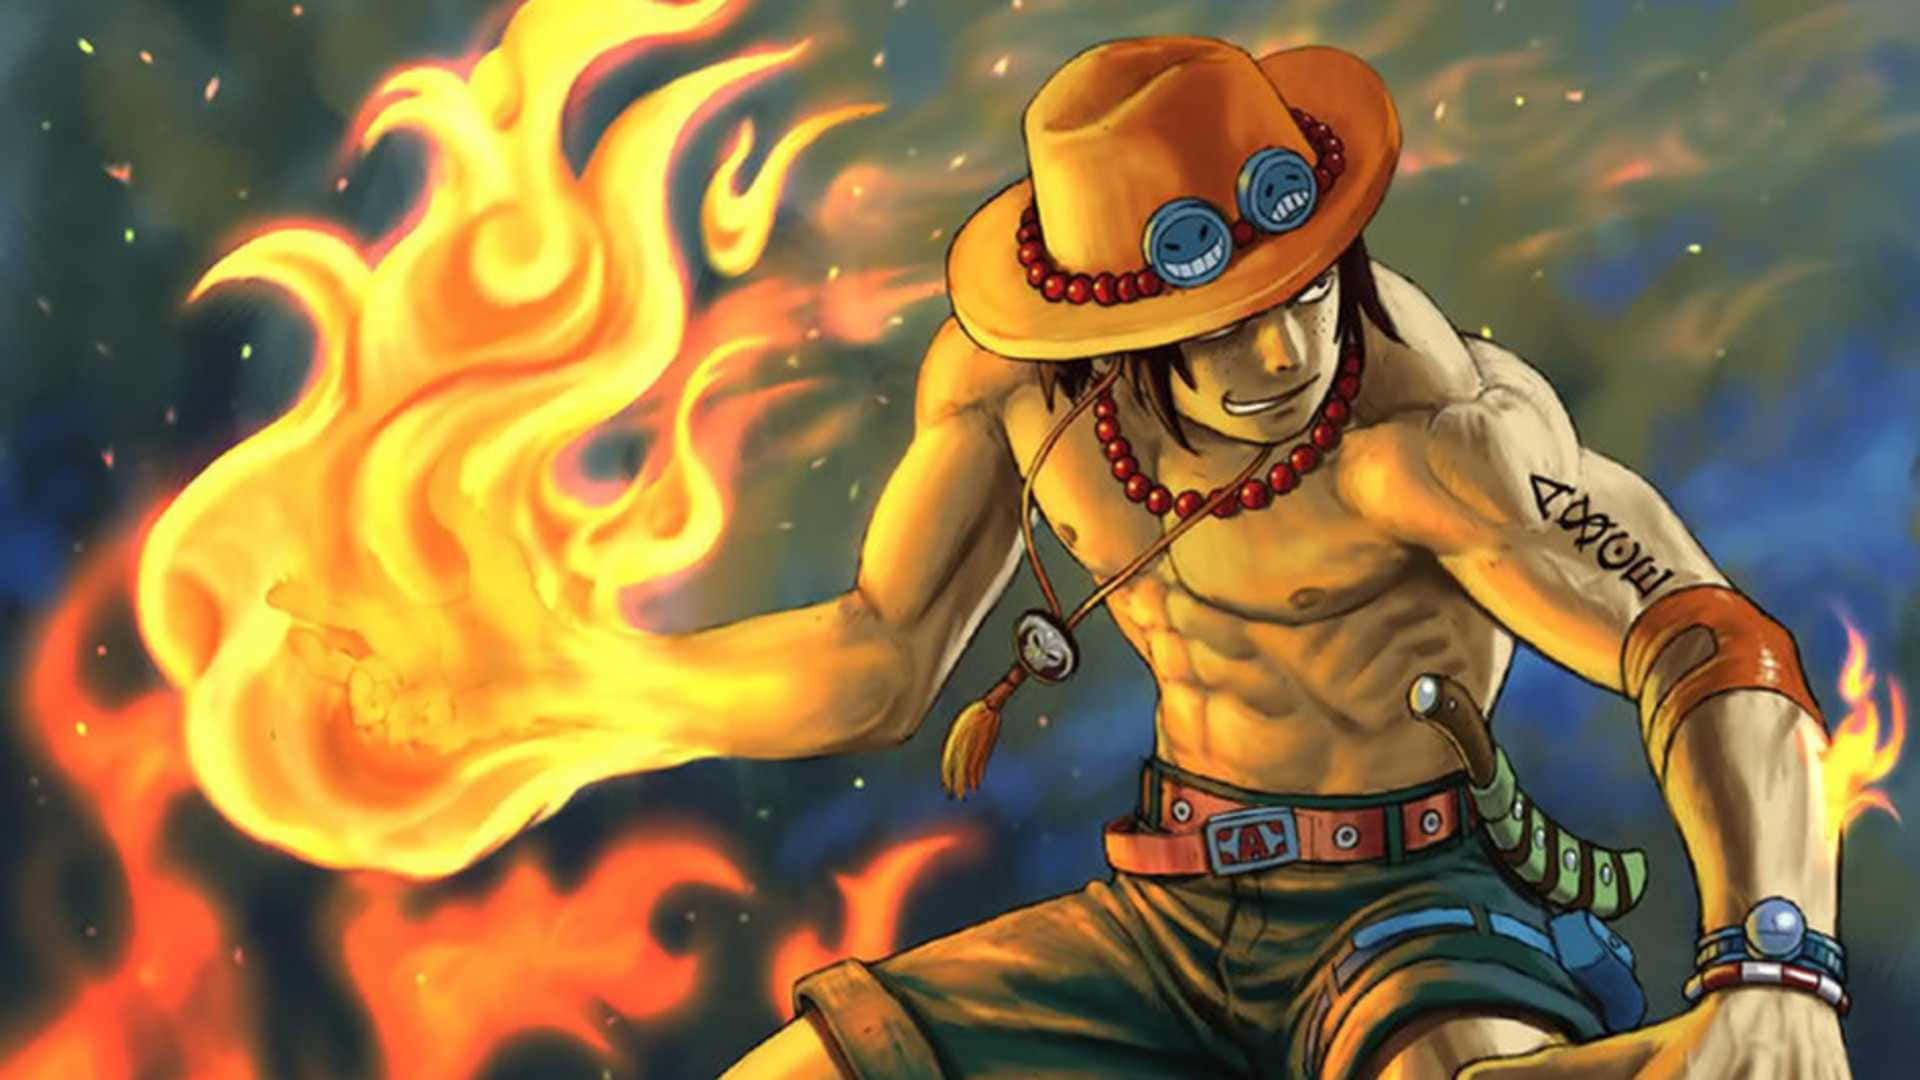 Portgas D Ace, The Legendary One Piece Pirate Background